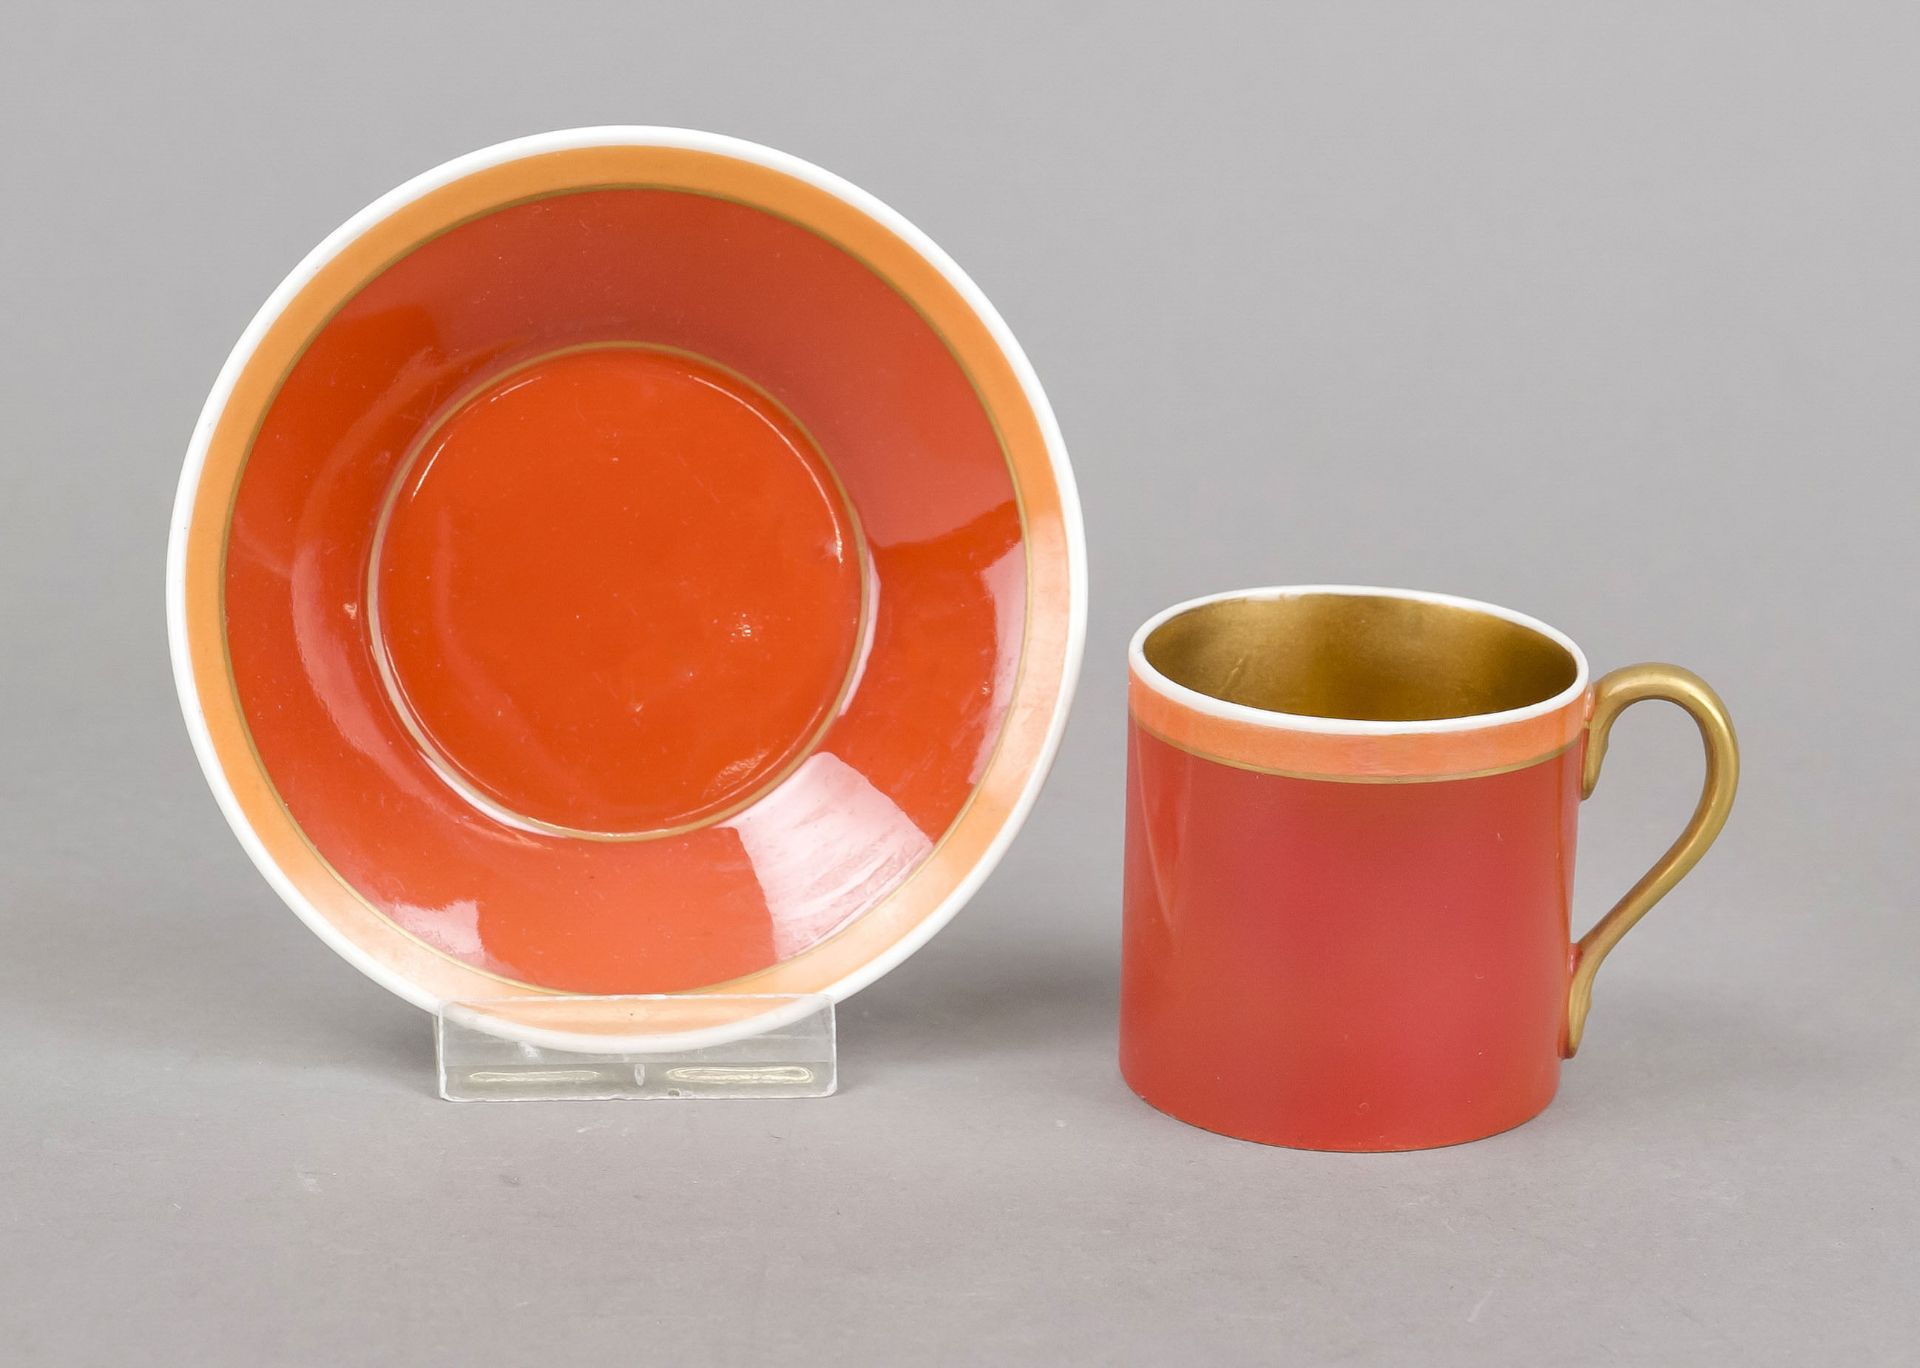 Mocha cup and saucer, KPM Berlin, pre-1945 mark, 1st choice, red imperial orb mark, cylindrical form